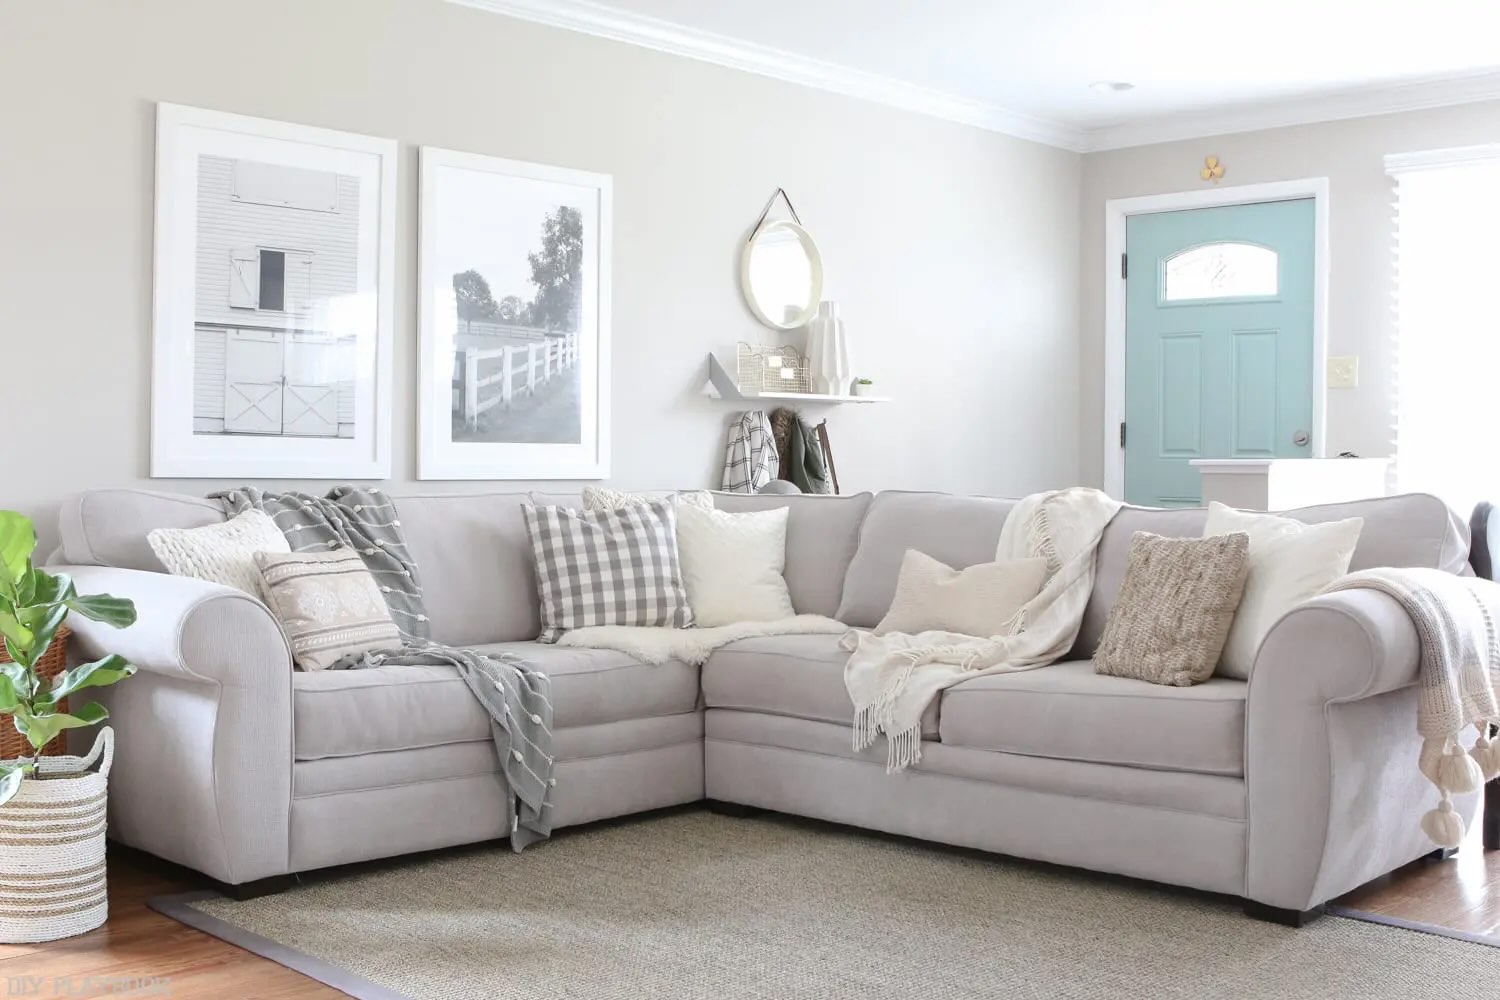 What Color Pillows Go With A Grey Couch